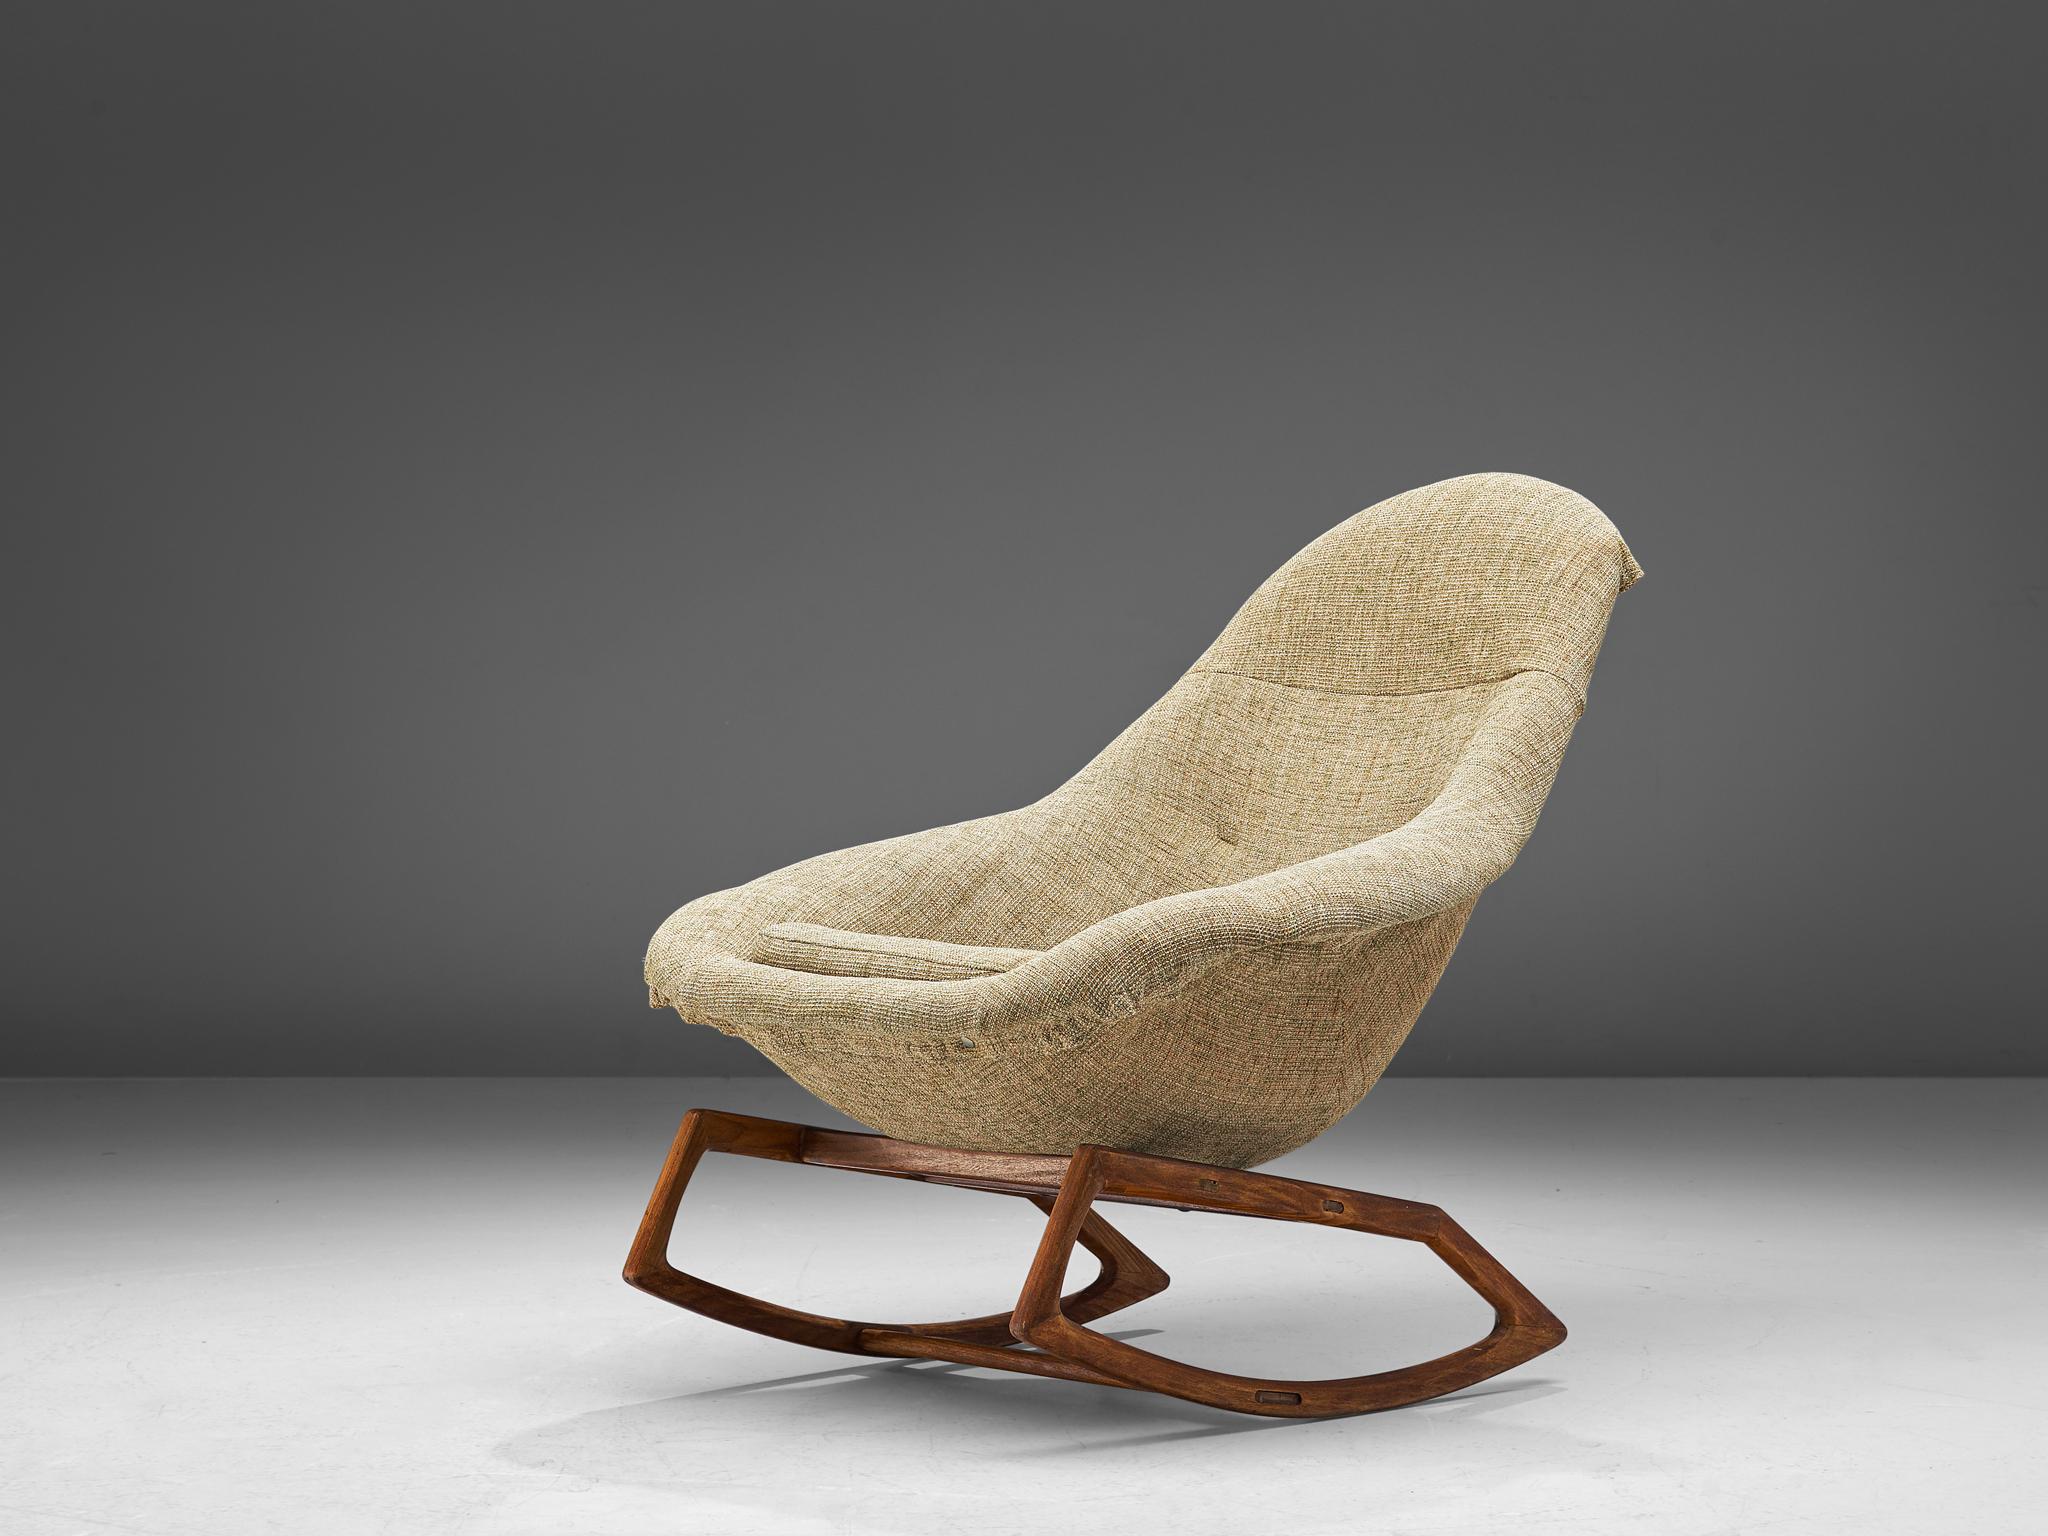 Rocking chair, fabric and beech, Denmark, 1960s

This Danish rocking chair would look perfect in a cosy corner. The piece features a seat shaped as a shell with a high back. The seat is upholstered in a grey/beige fabric. The frame attached to the